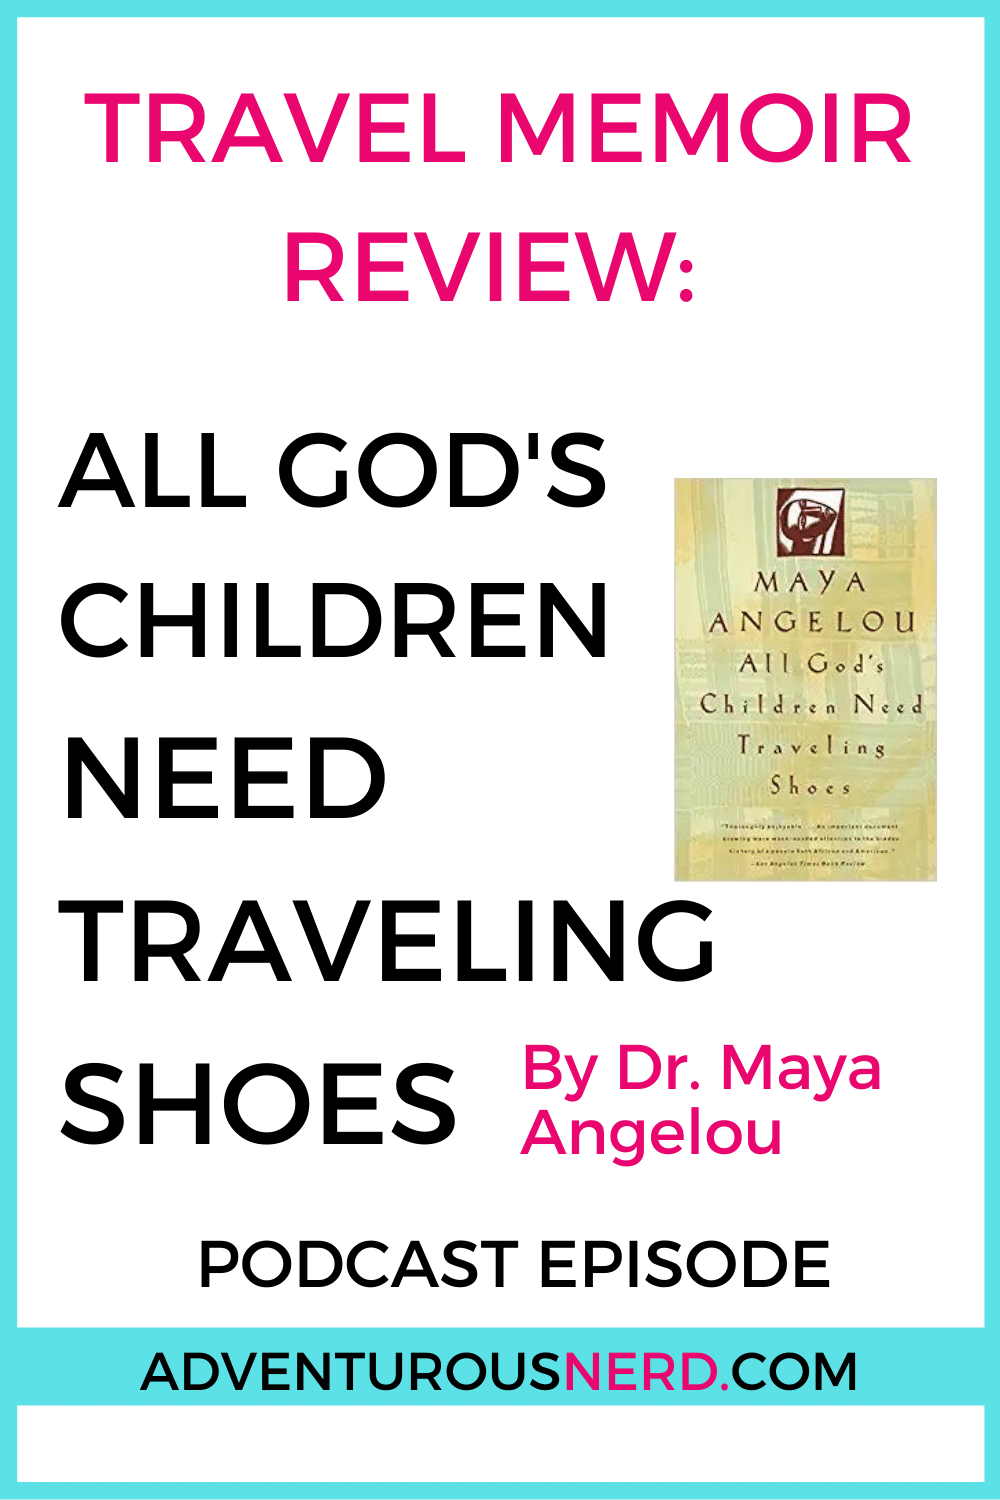 image of text box travel memoir review all gods children need traveling shoes by dr maya angelou